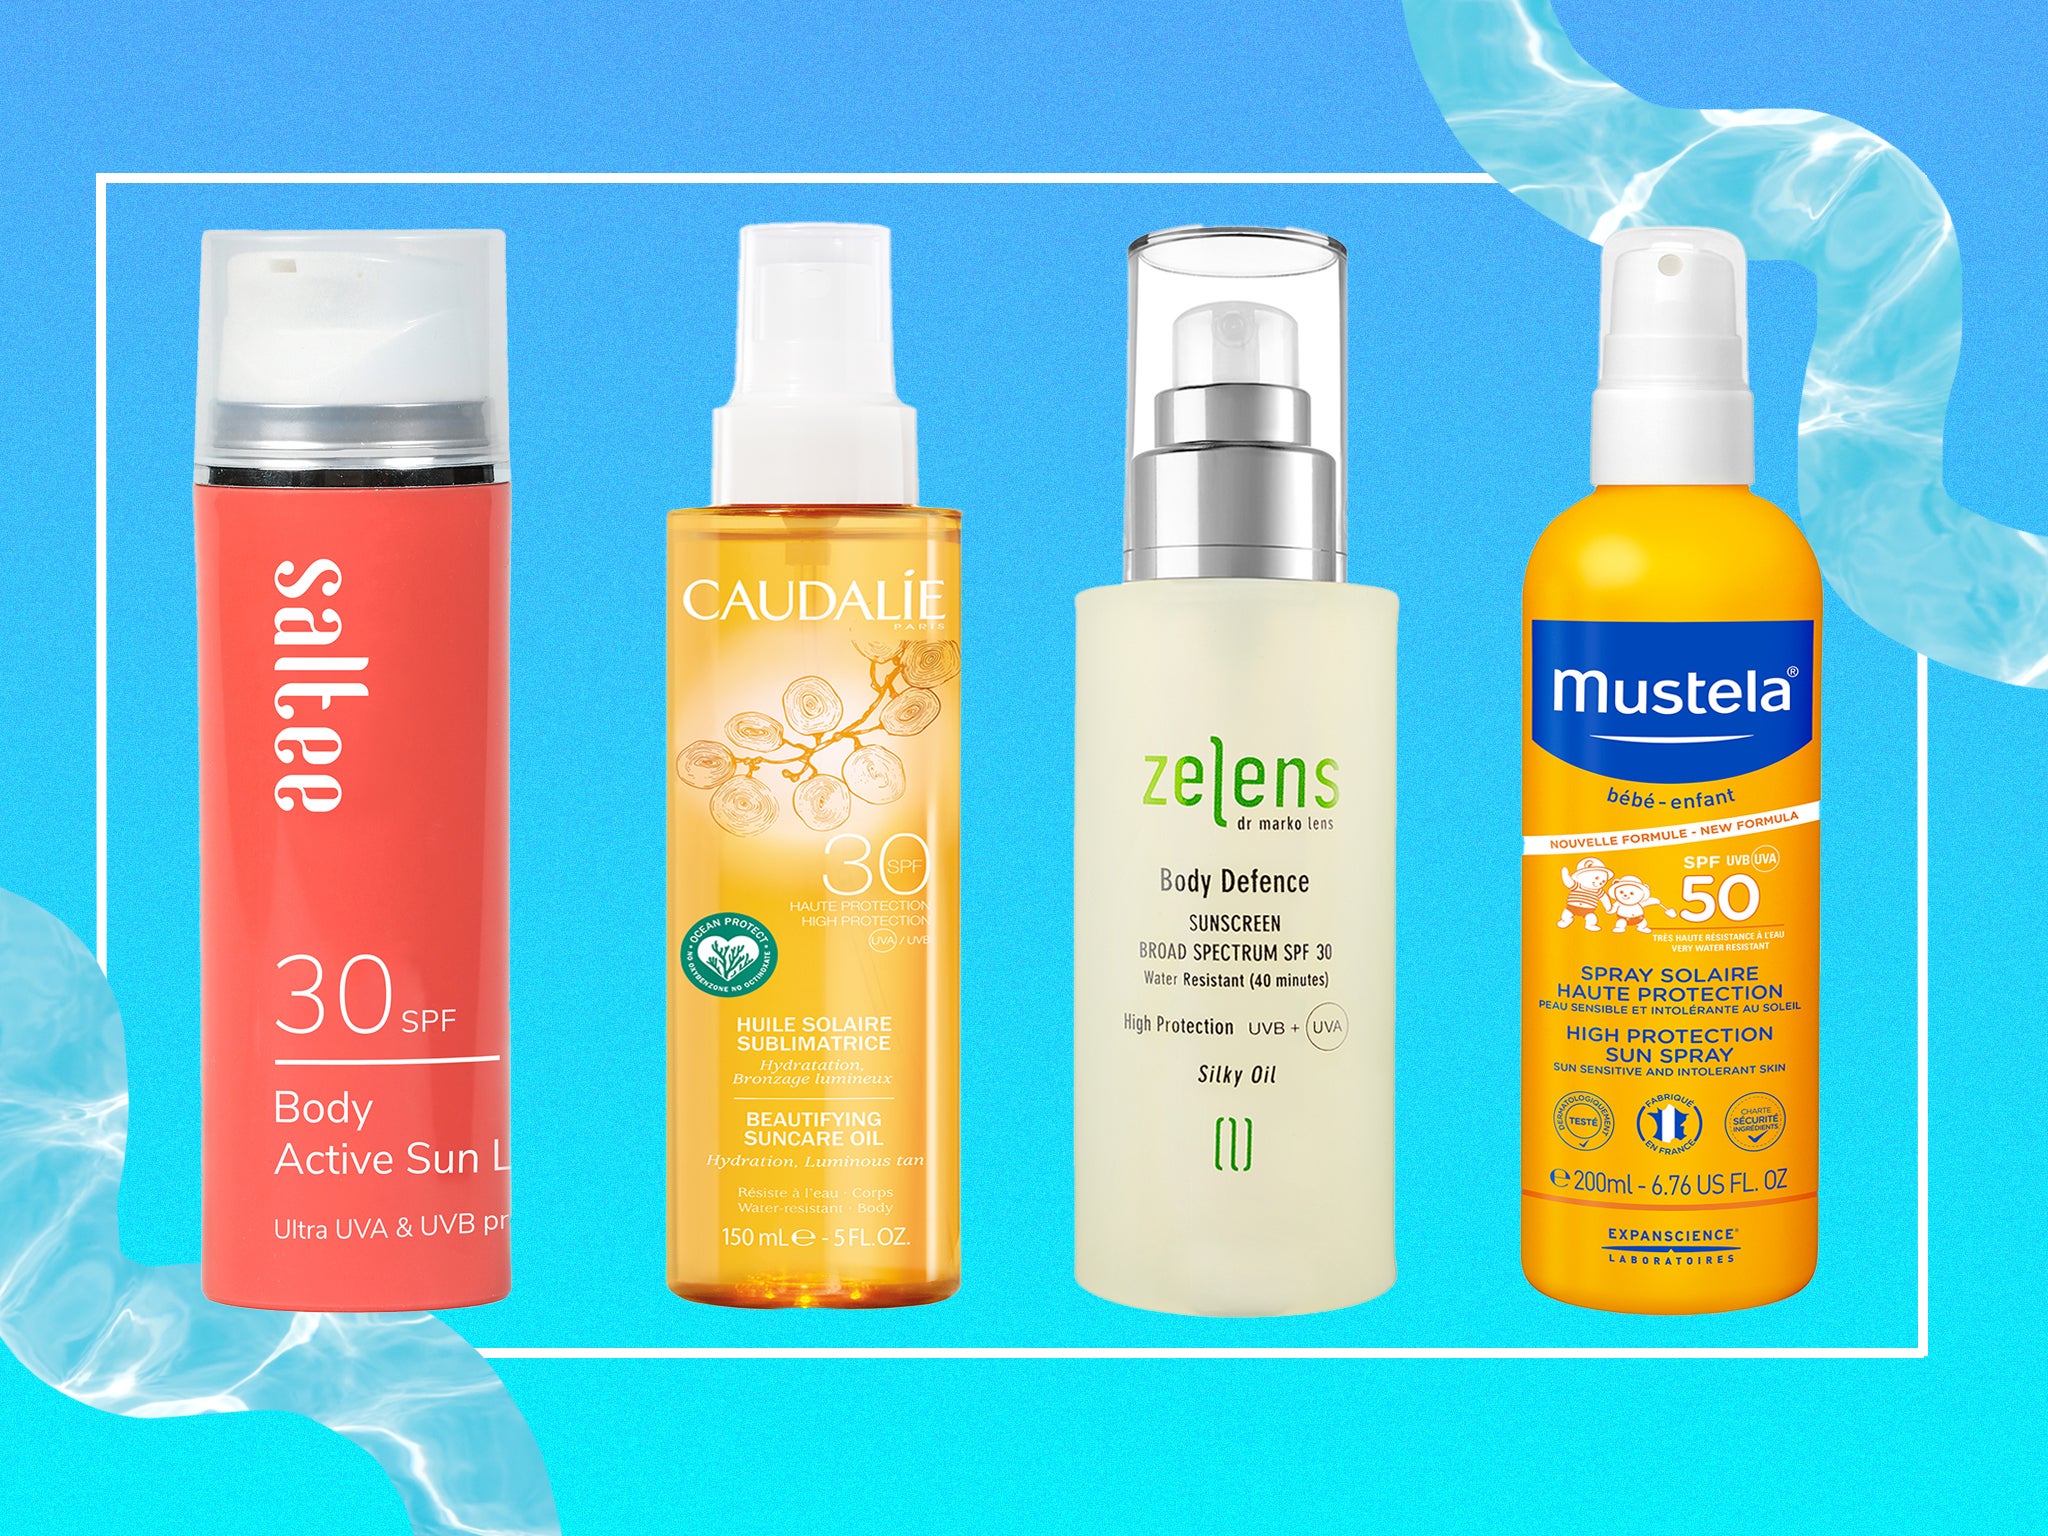 11 best sunscreens for your body: Lotions, sprays and creams for everyday use